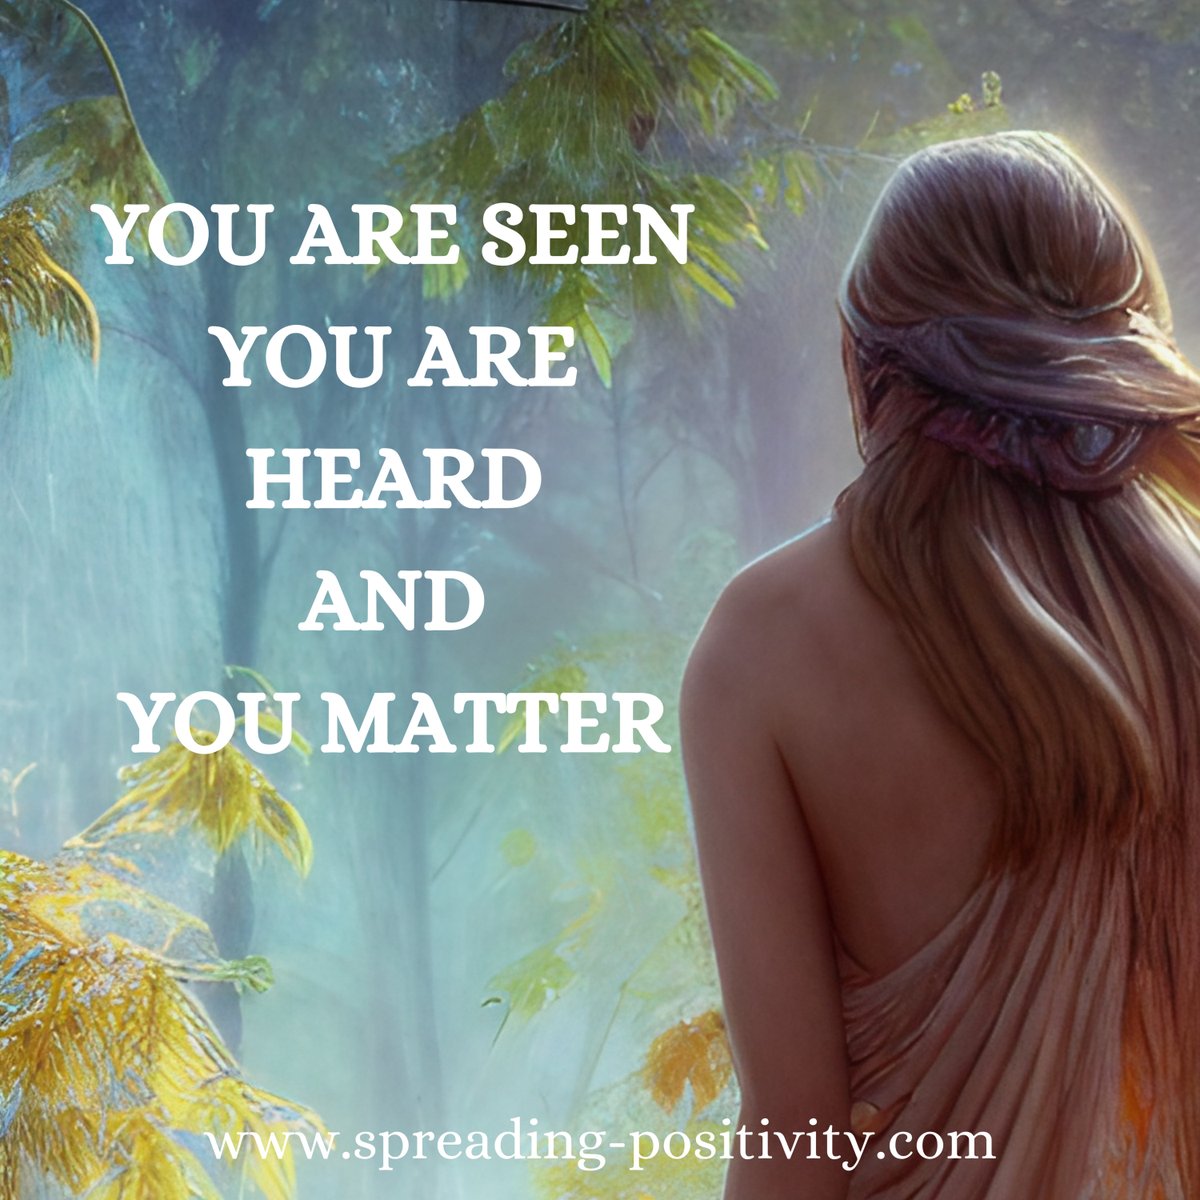 No matter what you are facing, remember that you are seen, heard and matter
#YouAreSeen #YouAreHeard #YouMatter #BeHeard #BeRemembered #SpeakYourTruth